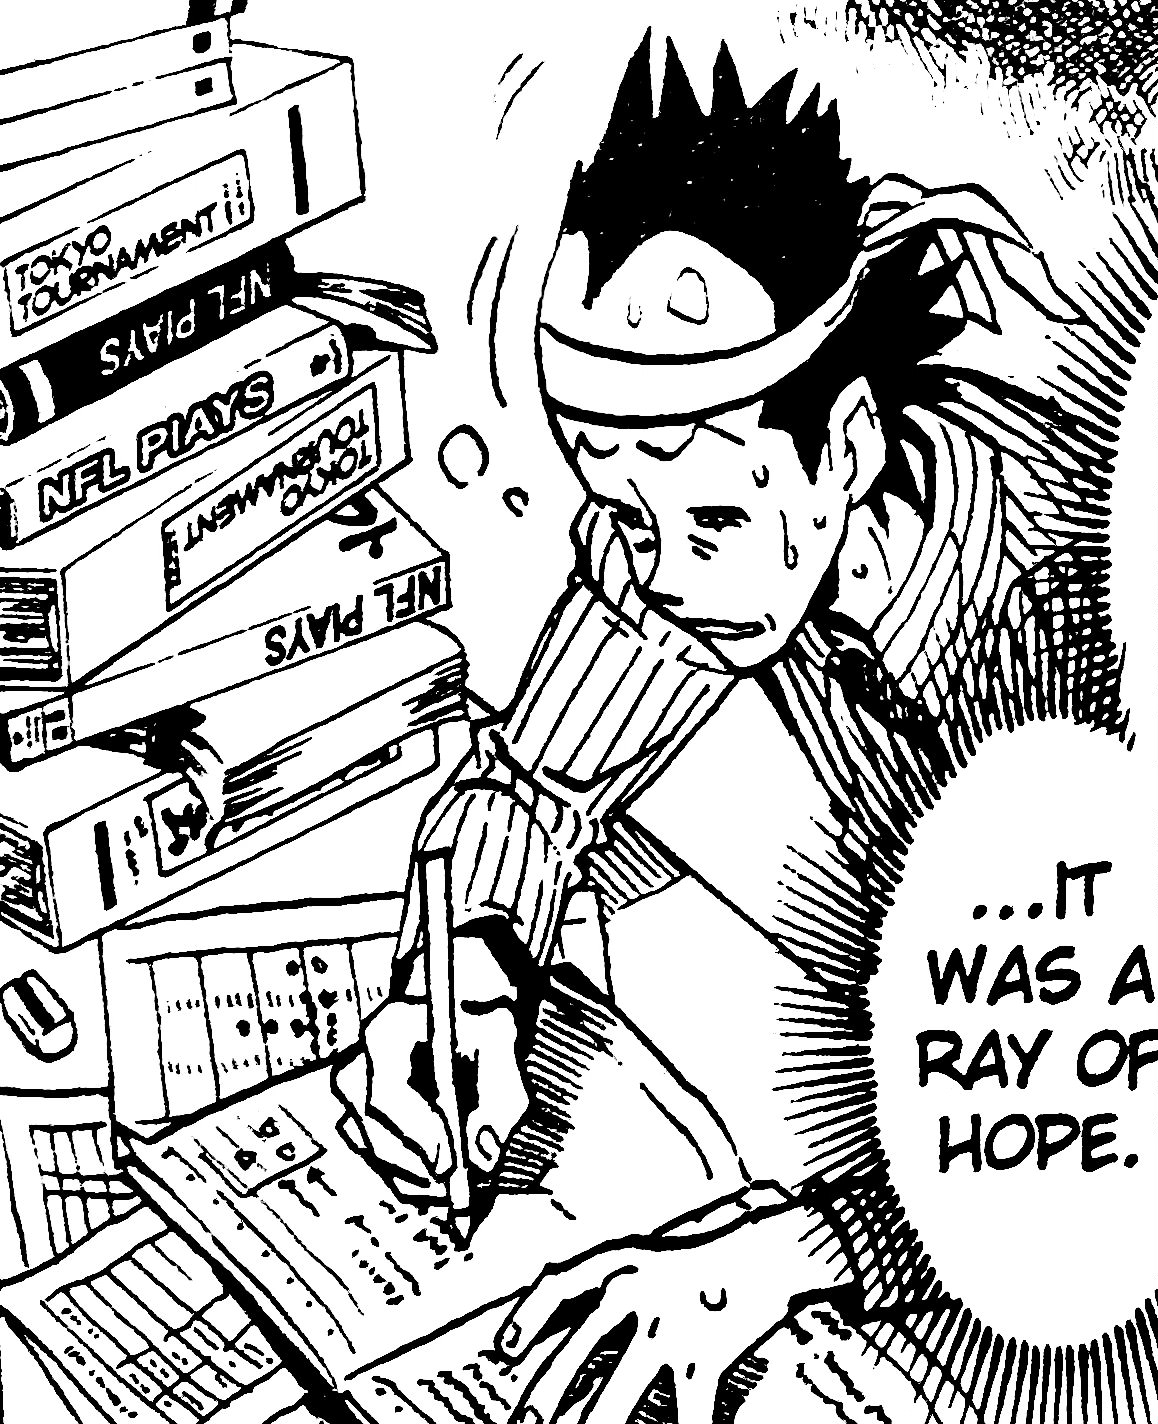 A manga panel showing Yukimitsu studying football plays in his pajamas and yawning, while looking visibly exhausted. A stack of football books and notes sits beside him, and he's wearing a hachimaki, consistent with the gariben stereotype. He recalls, 'It was a ray of hope,' when remembering that Hiruma entrusted him to memorize so much information.